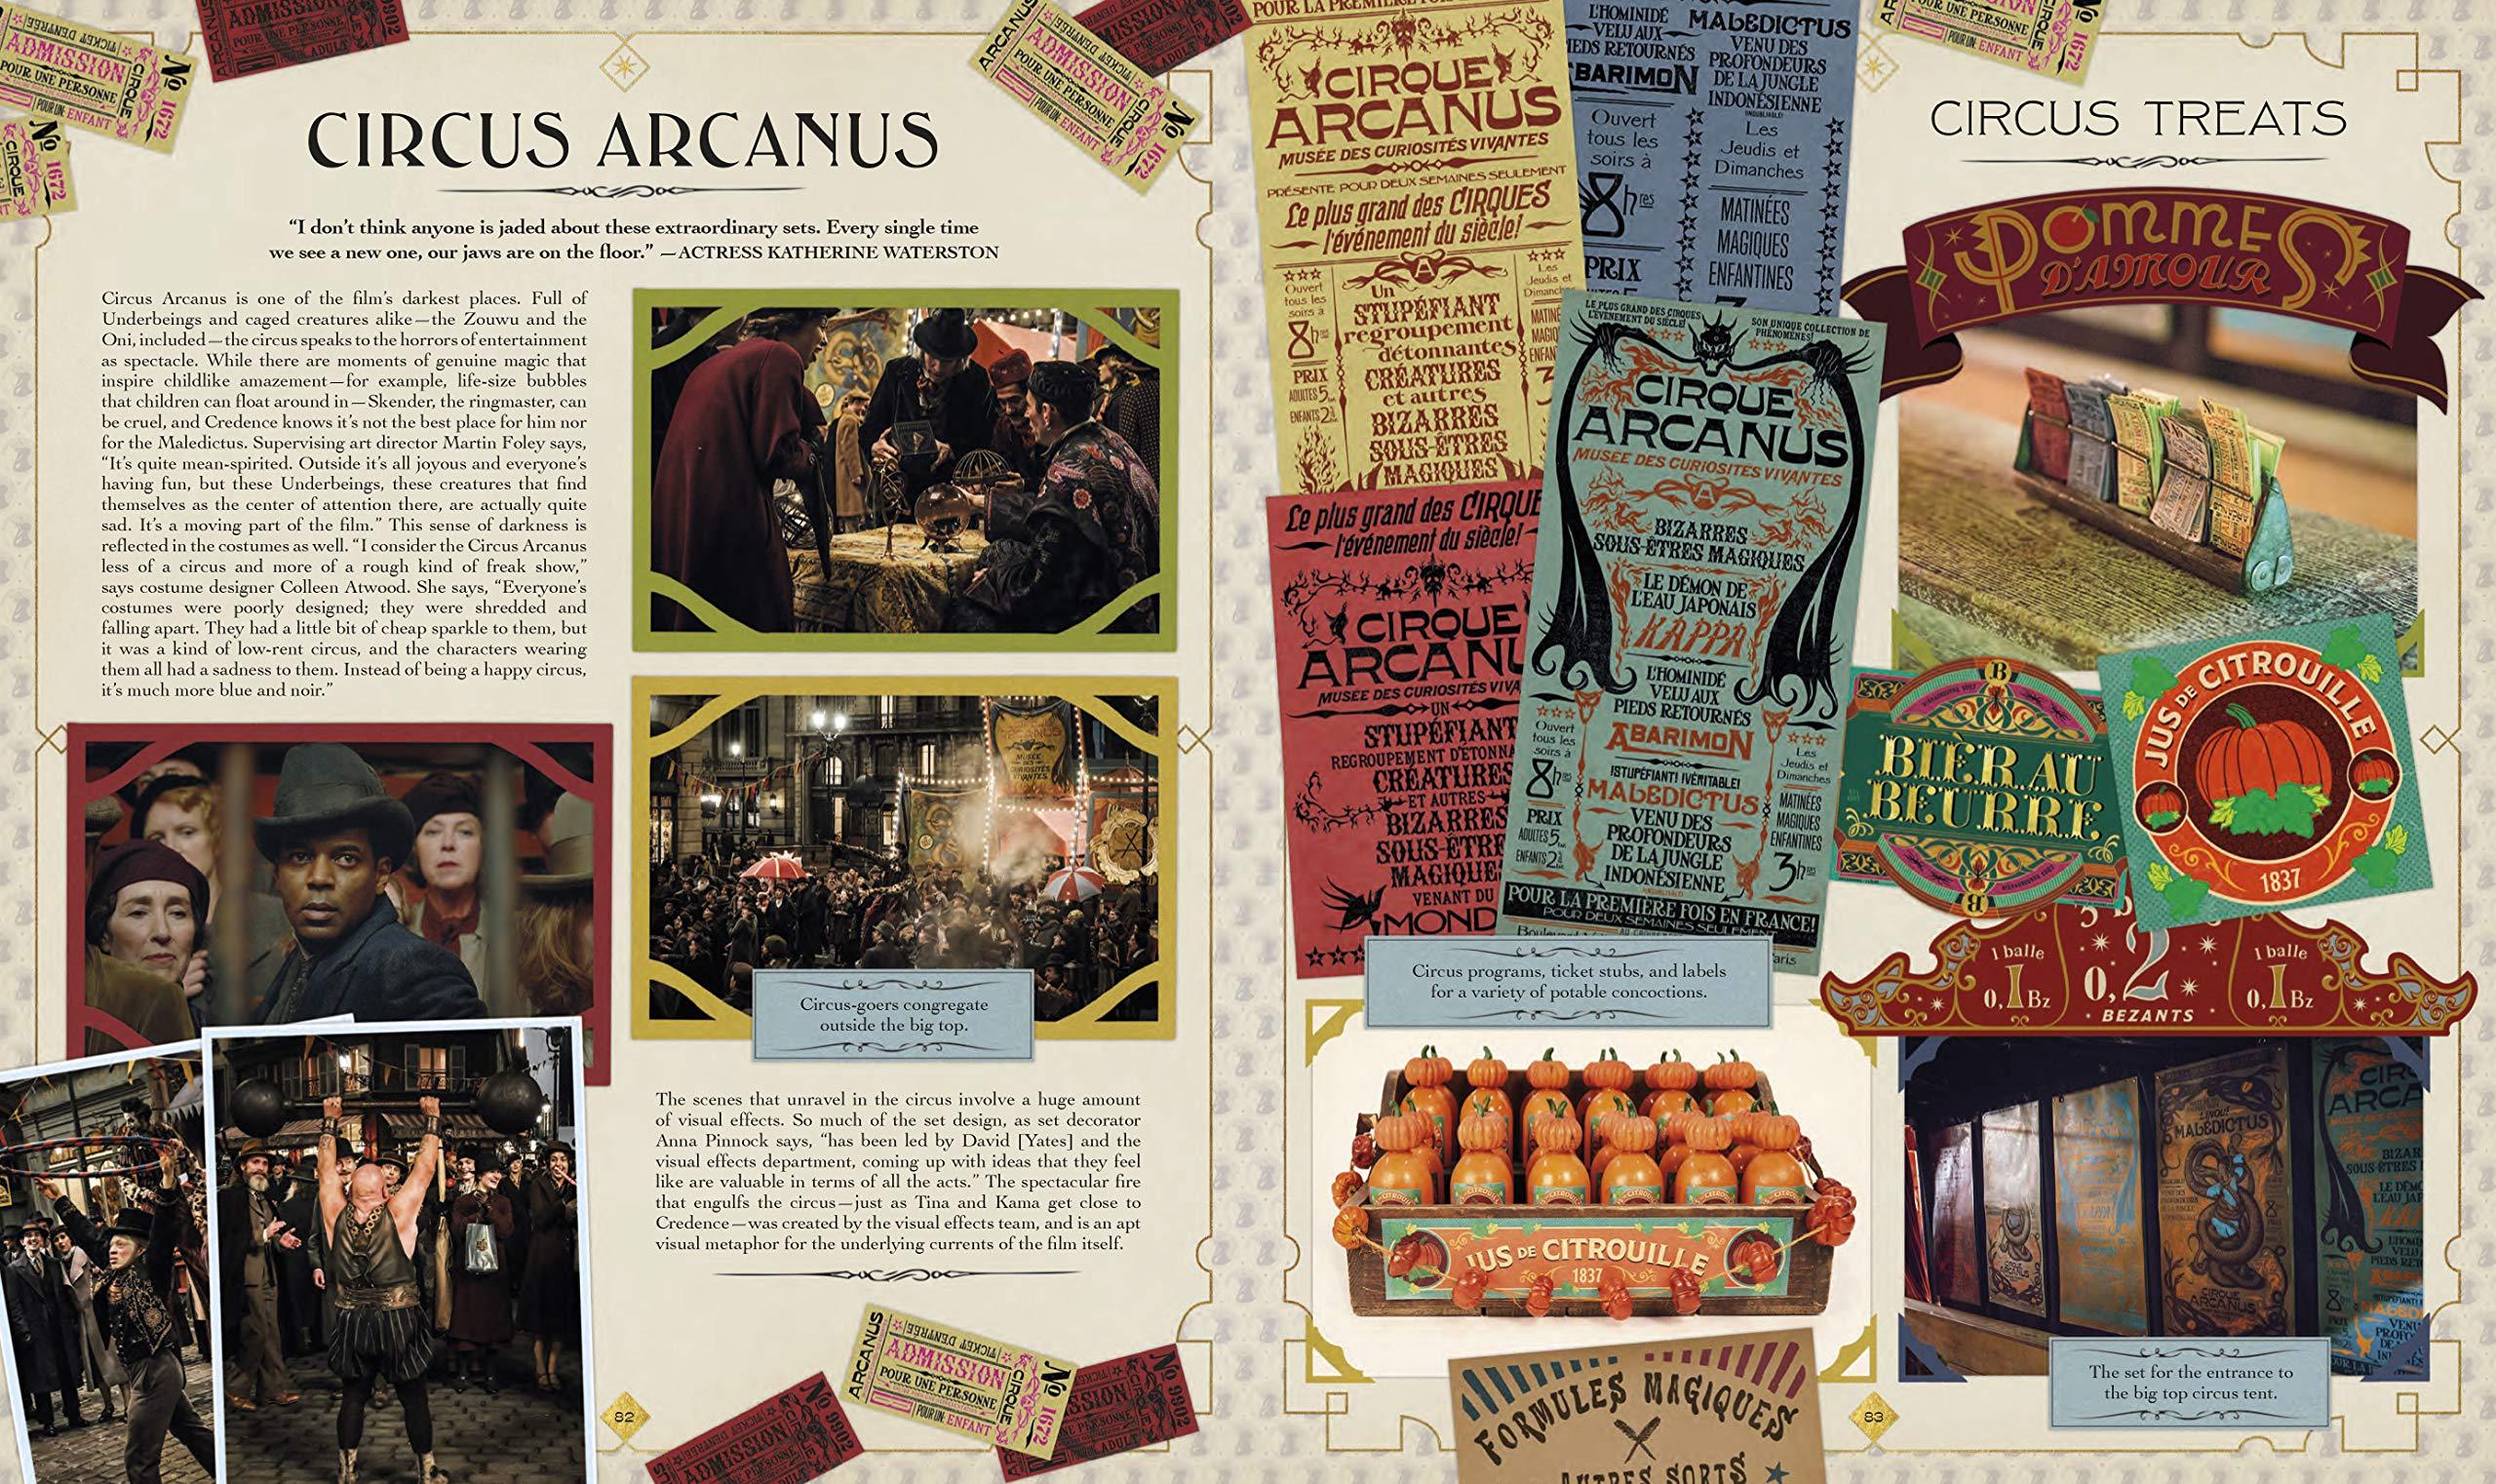 The Archive of Magic - The Film Wizardry of Fantastic Beasts: The Crimes of Grindelwald - Spectrawide Bookstore